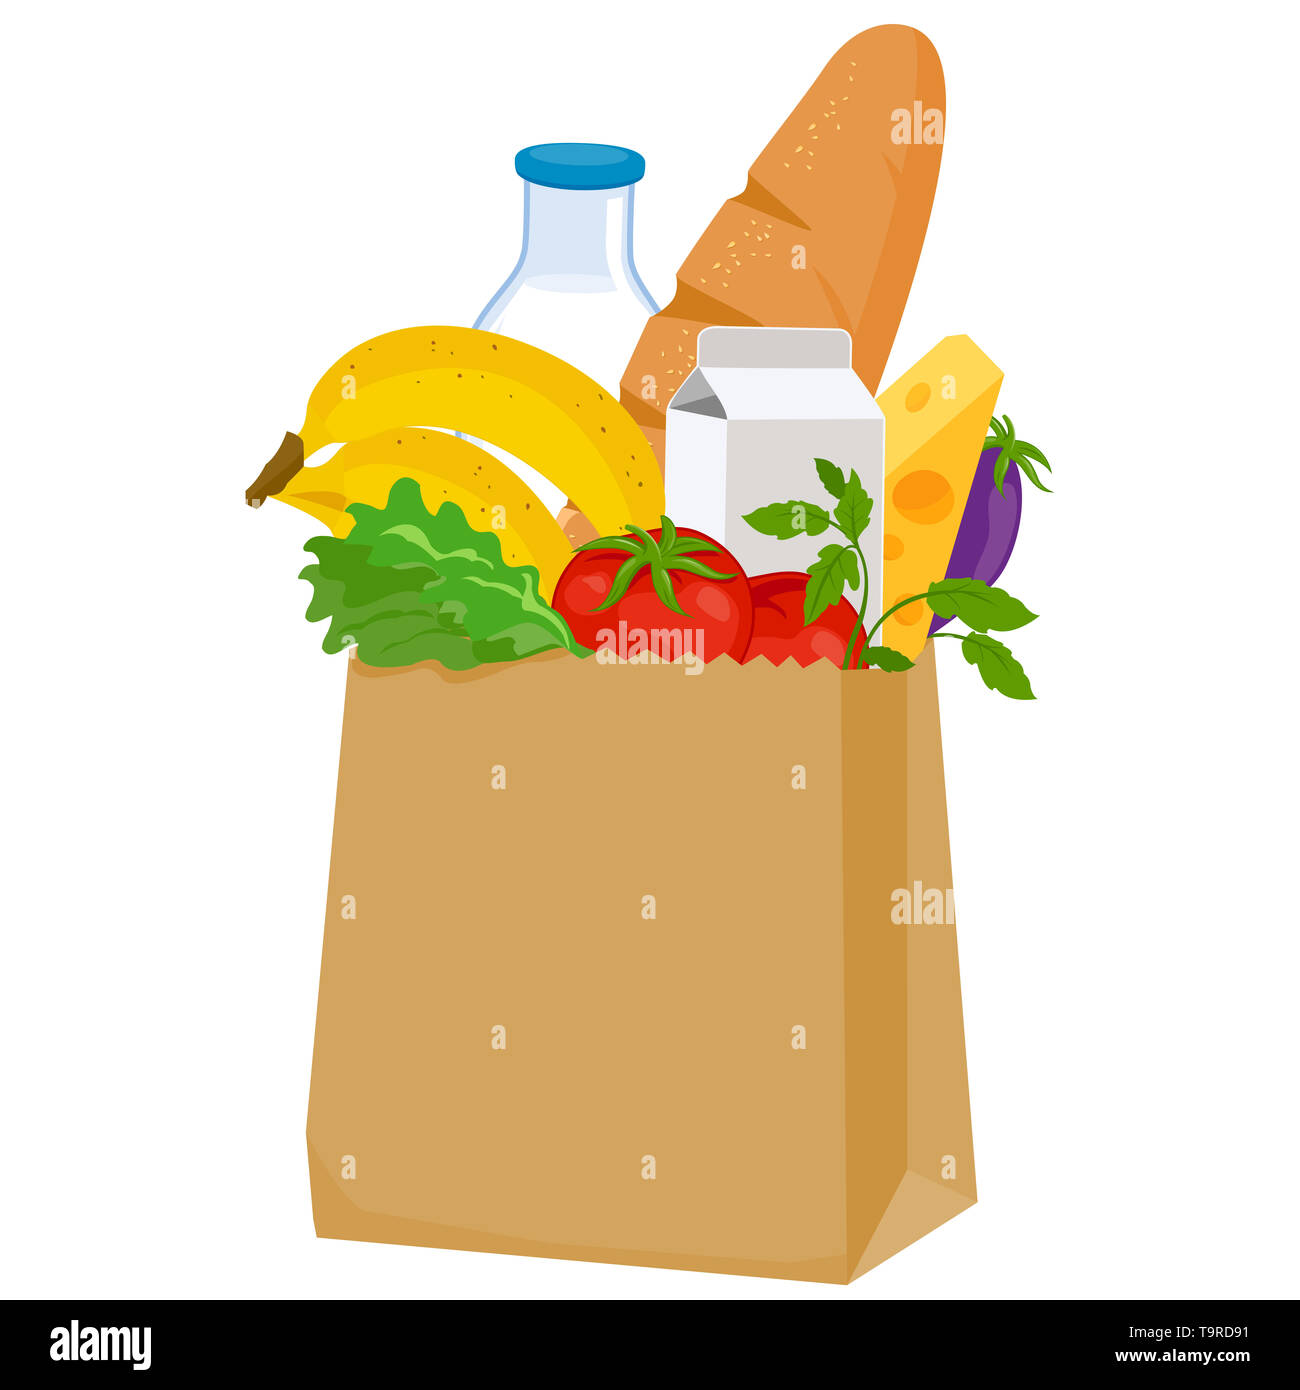 Paper bag with groceries: milk, bread, fruits, vegetables and cheese. Stock Photo